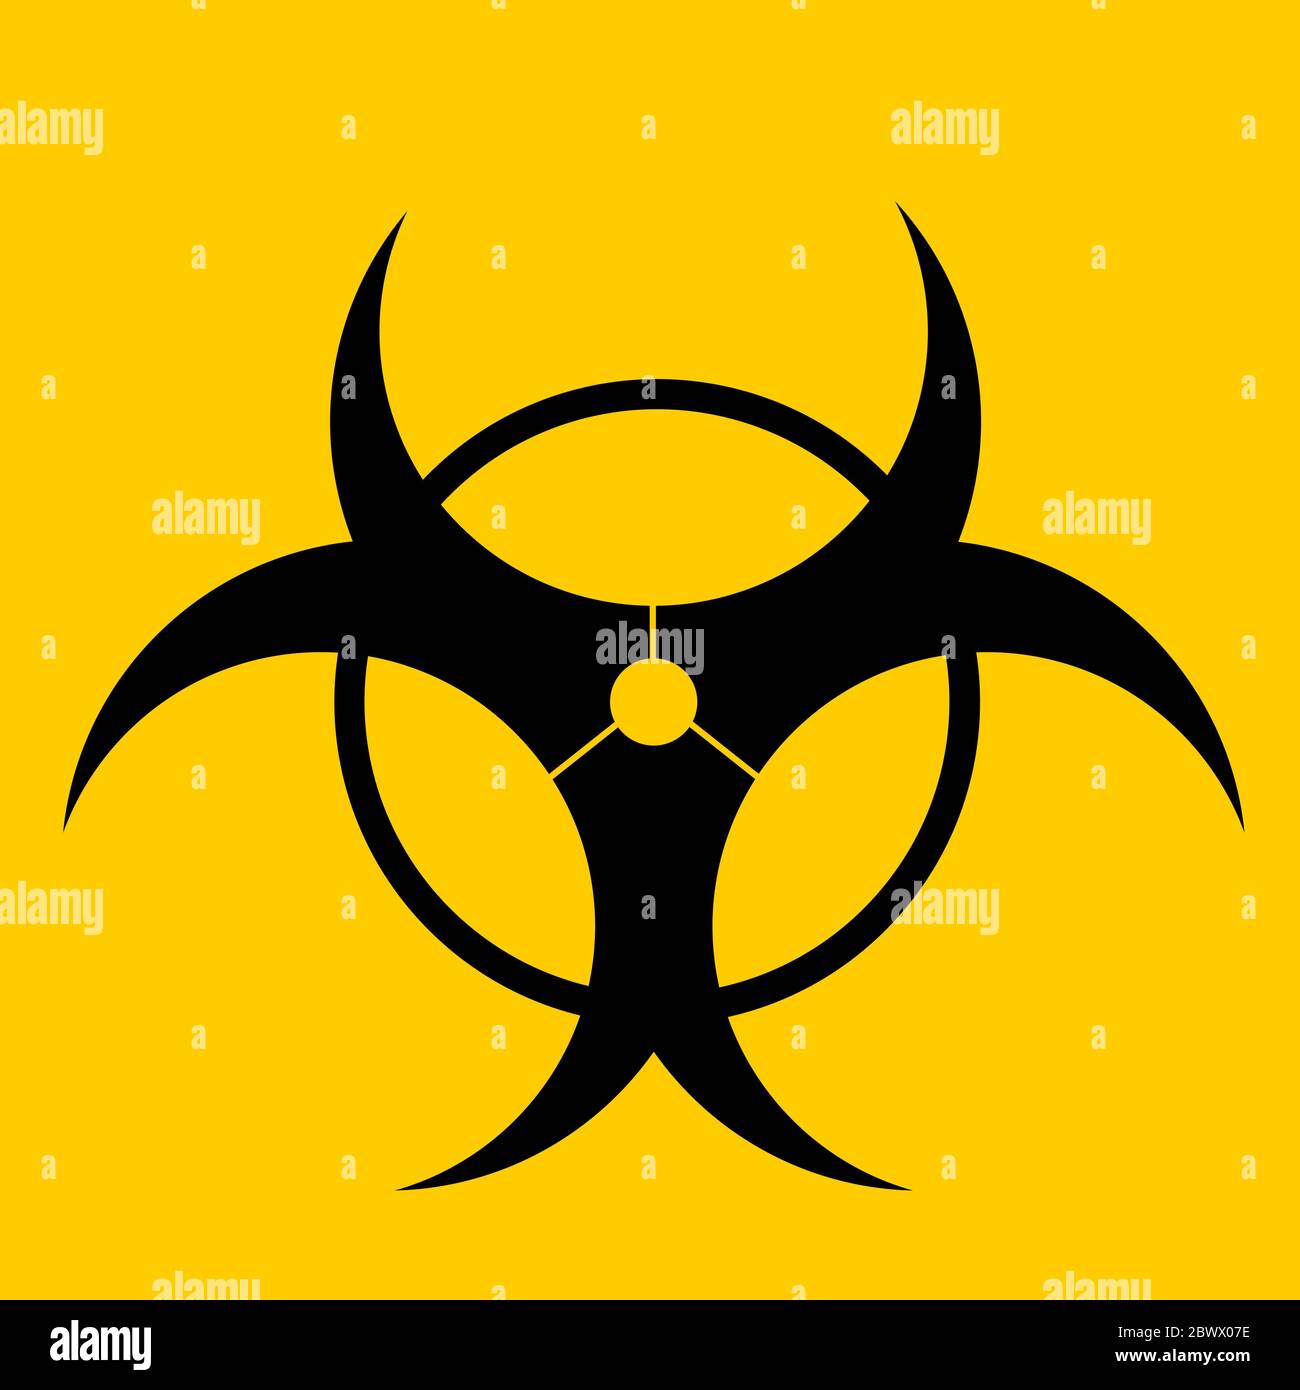 Biohazard symbol vector illustration isolated on a yellow background Stock Vector